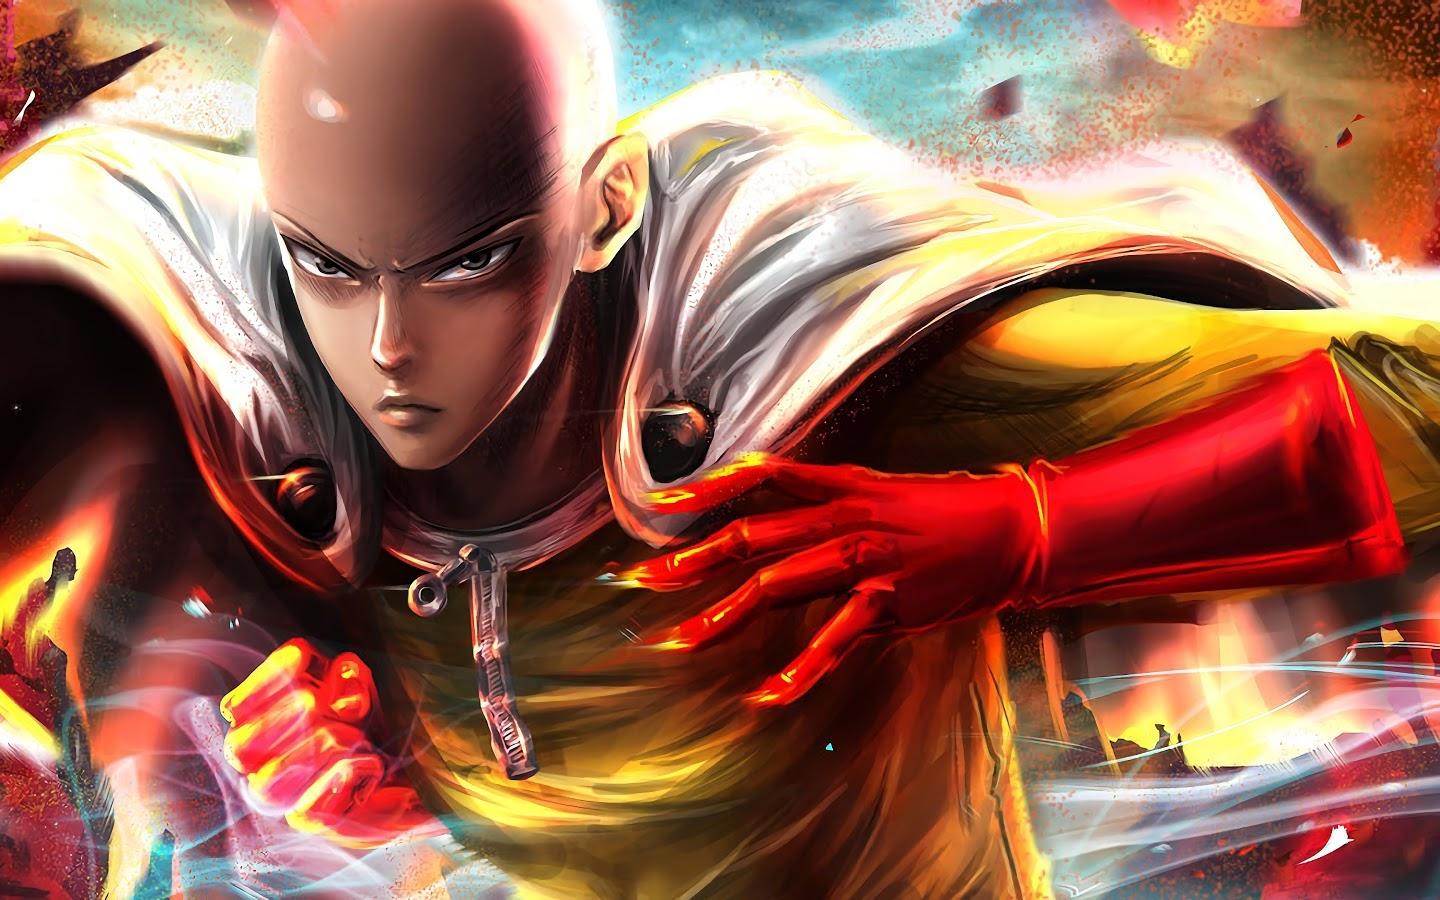 800x1280 Saitama One Punch Man Nexus 7,Samsung Galaxy Tab 10,Note Android  Tablets ,HD 4k Wallpapers,Images,Backgrounds,Photos and Pictures